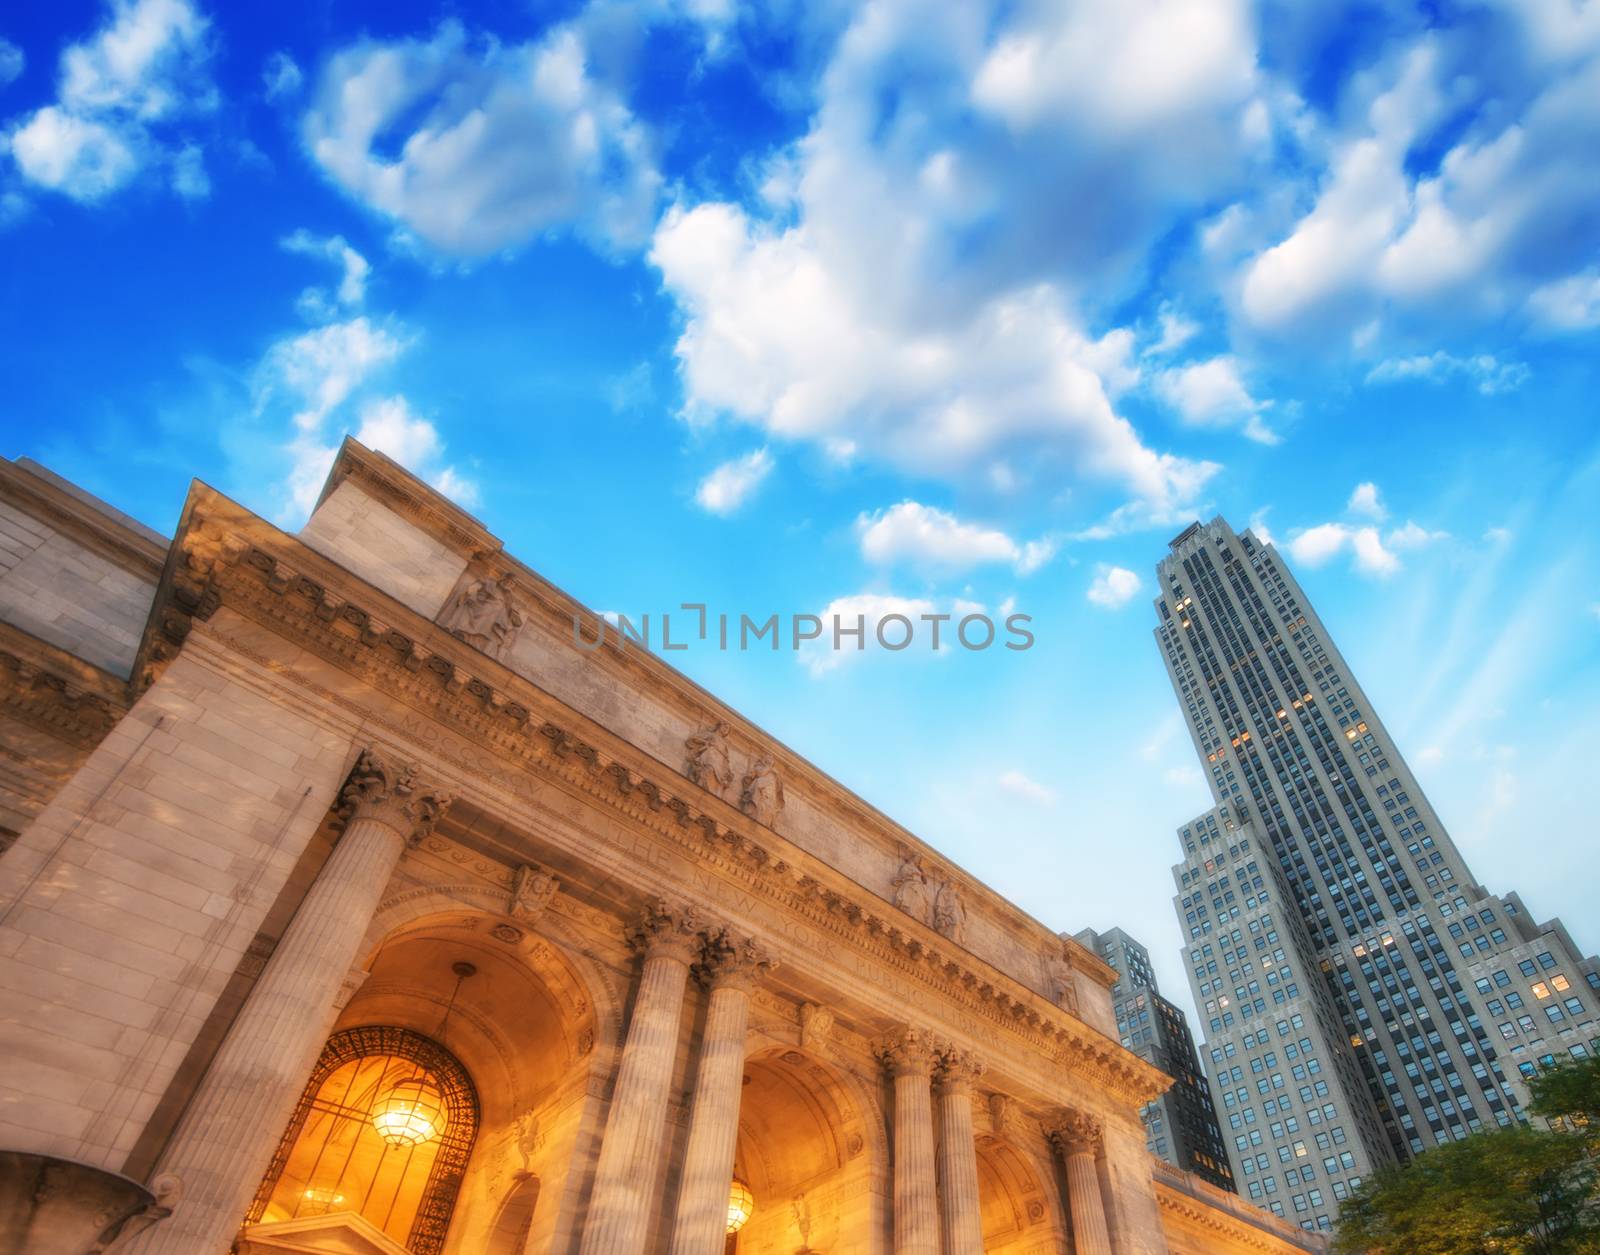 The New York Public Library. Side view with surrounding buildings and dramatic sky.